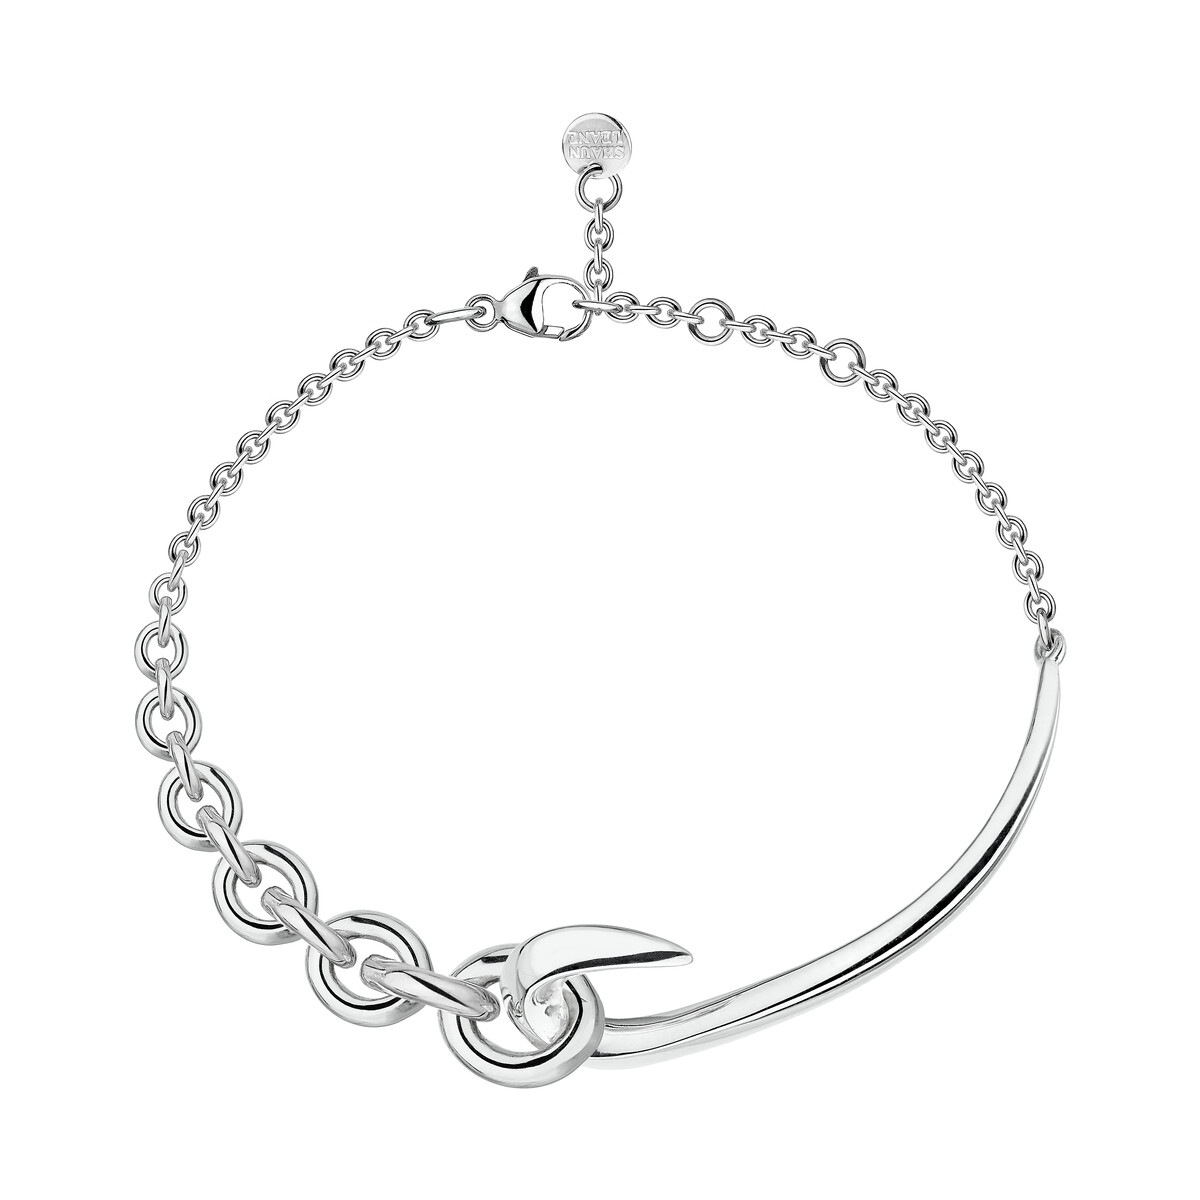 Front Hook Solid 925 Sterling Silver Bracelet Bangle – The Mexican